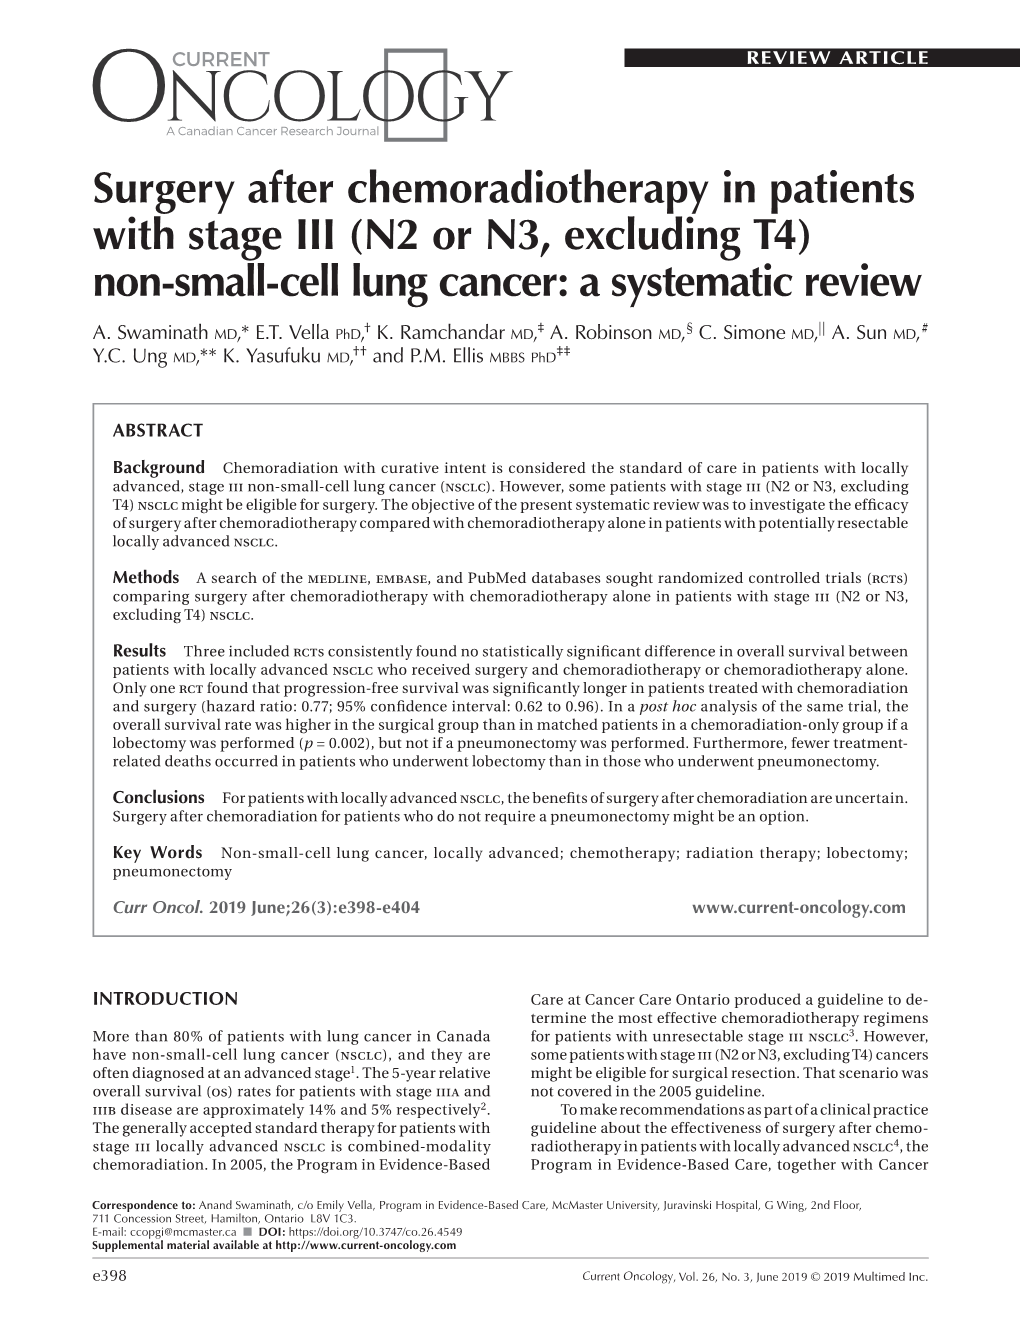 Surgery After Chemoradiotherapy in Patients with Stage III (N2 Or N3, Excluding T4) Non-Small-Cell Lung Cancer: a Systematic Review